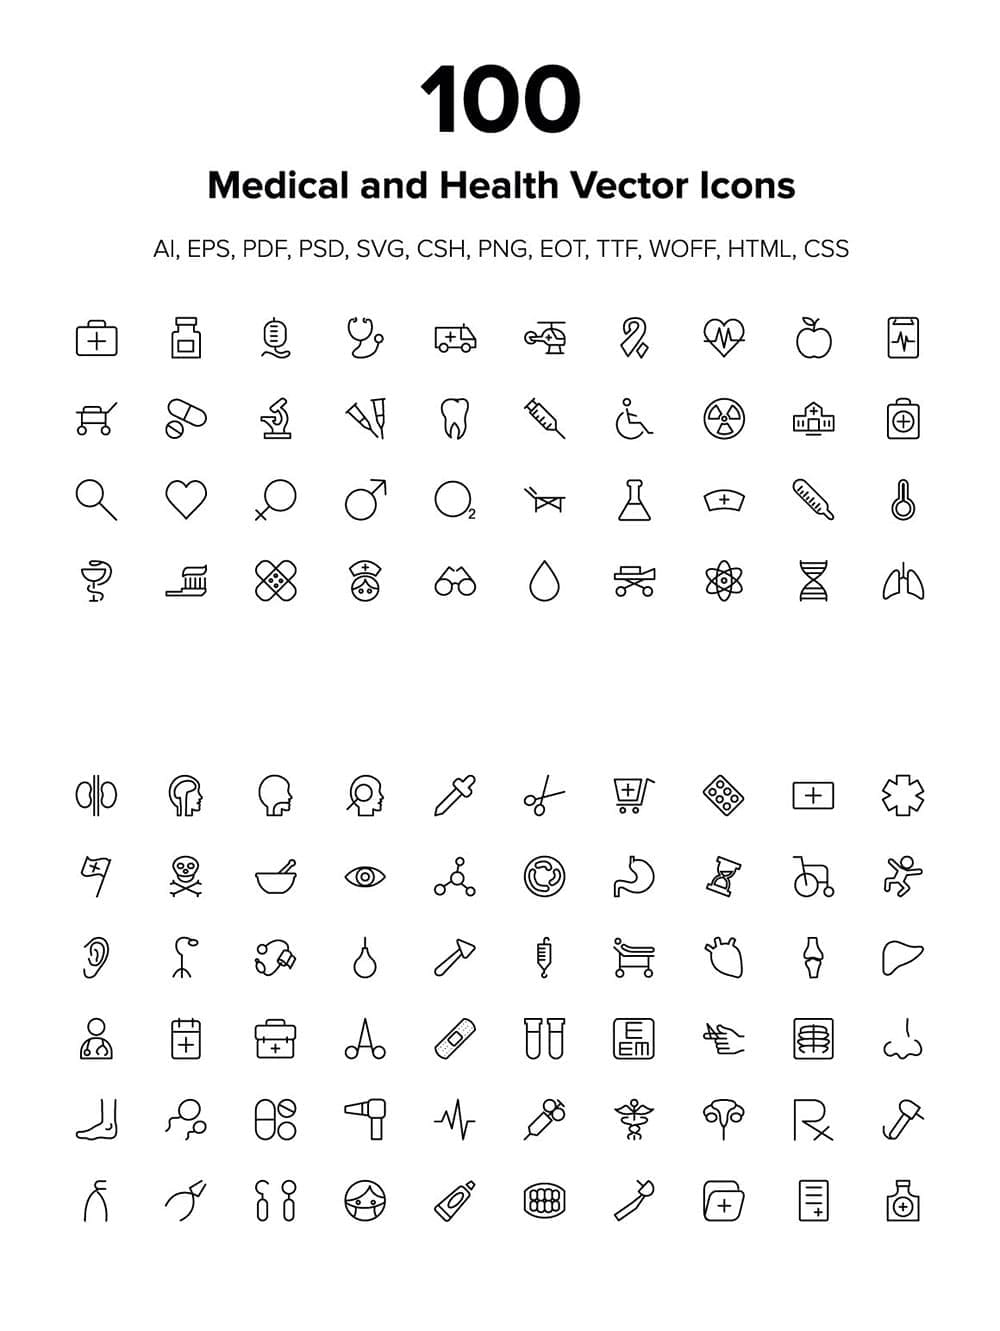 Medical and health vector icons, picture for pinterest.